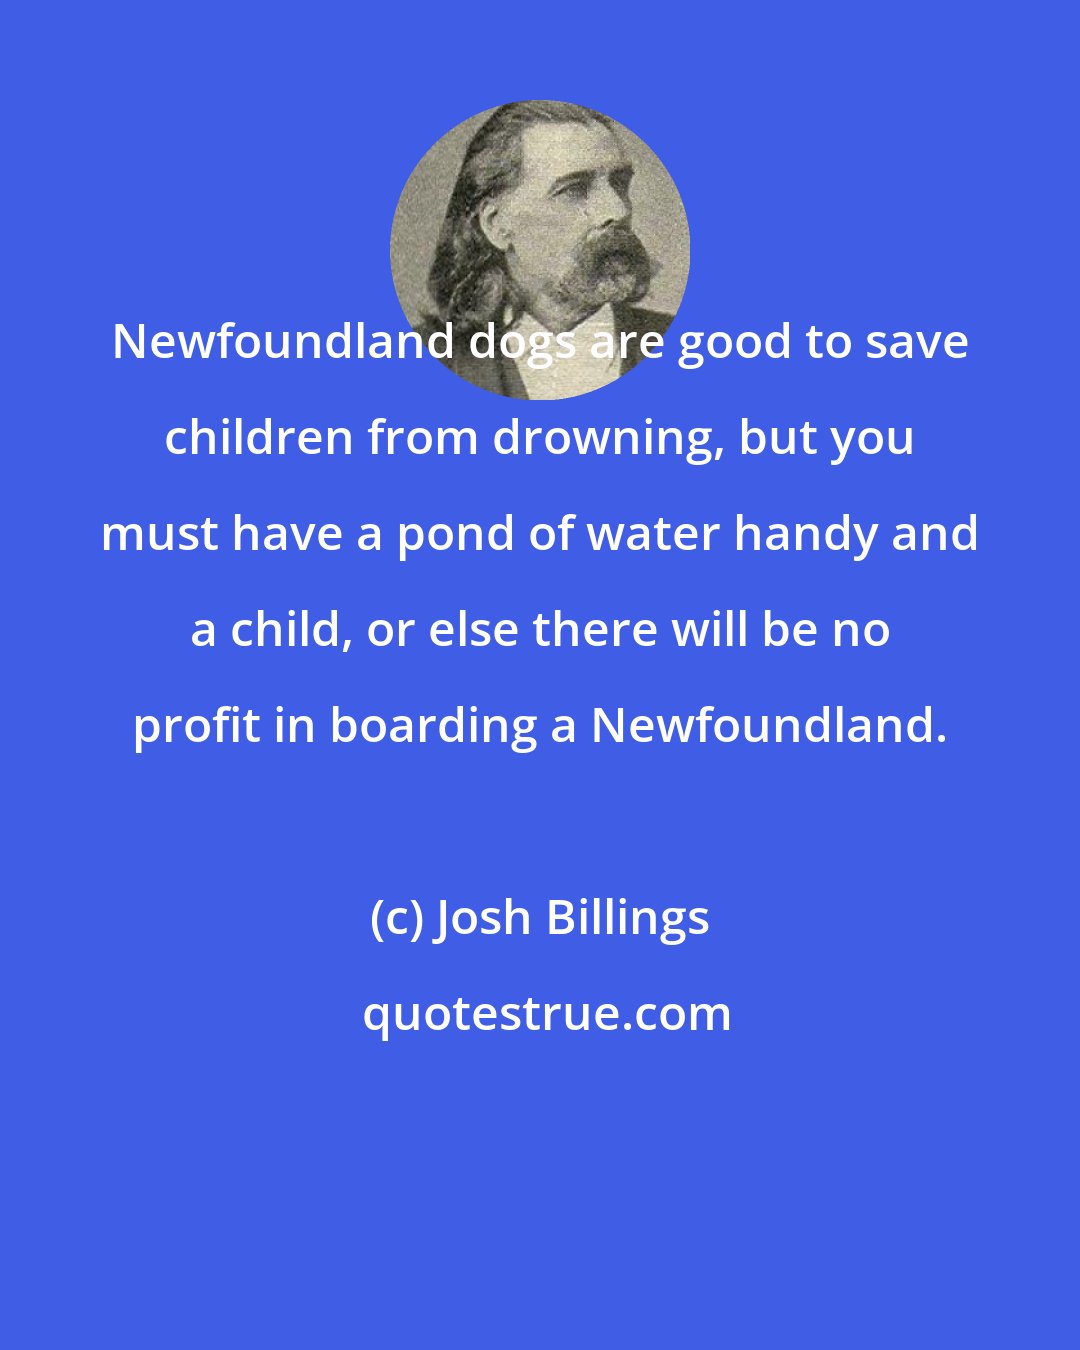 Josh Billings: Newfoundland dogs are good to save children from drowning, but you must have a pond of water handy and a child, or else there will be no profit in boarding a Newfoundland.